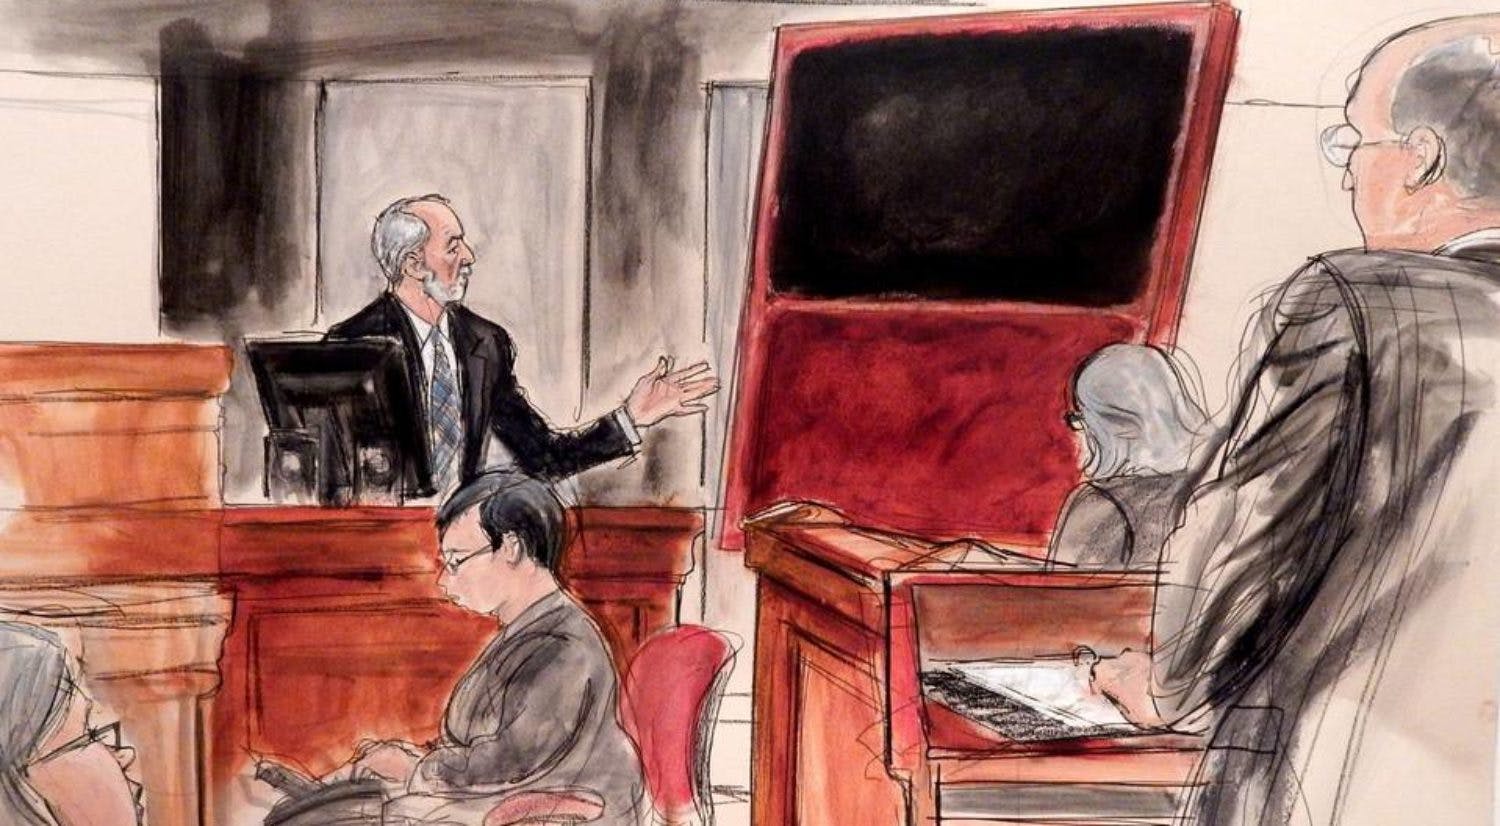 A courtroom sketch of Domenico De Sole on the witness stand with the fake Rothko painting he bought from Knoedler gallery.